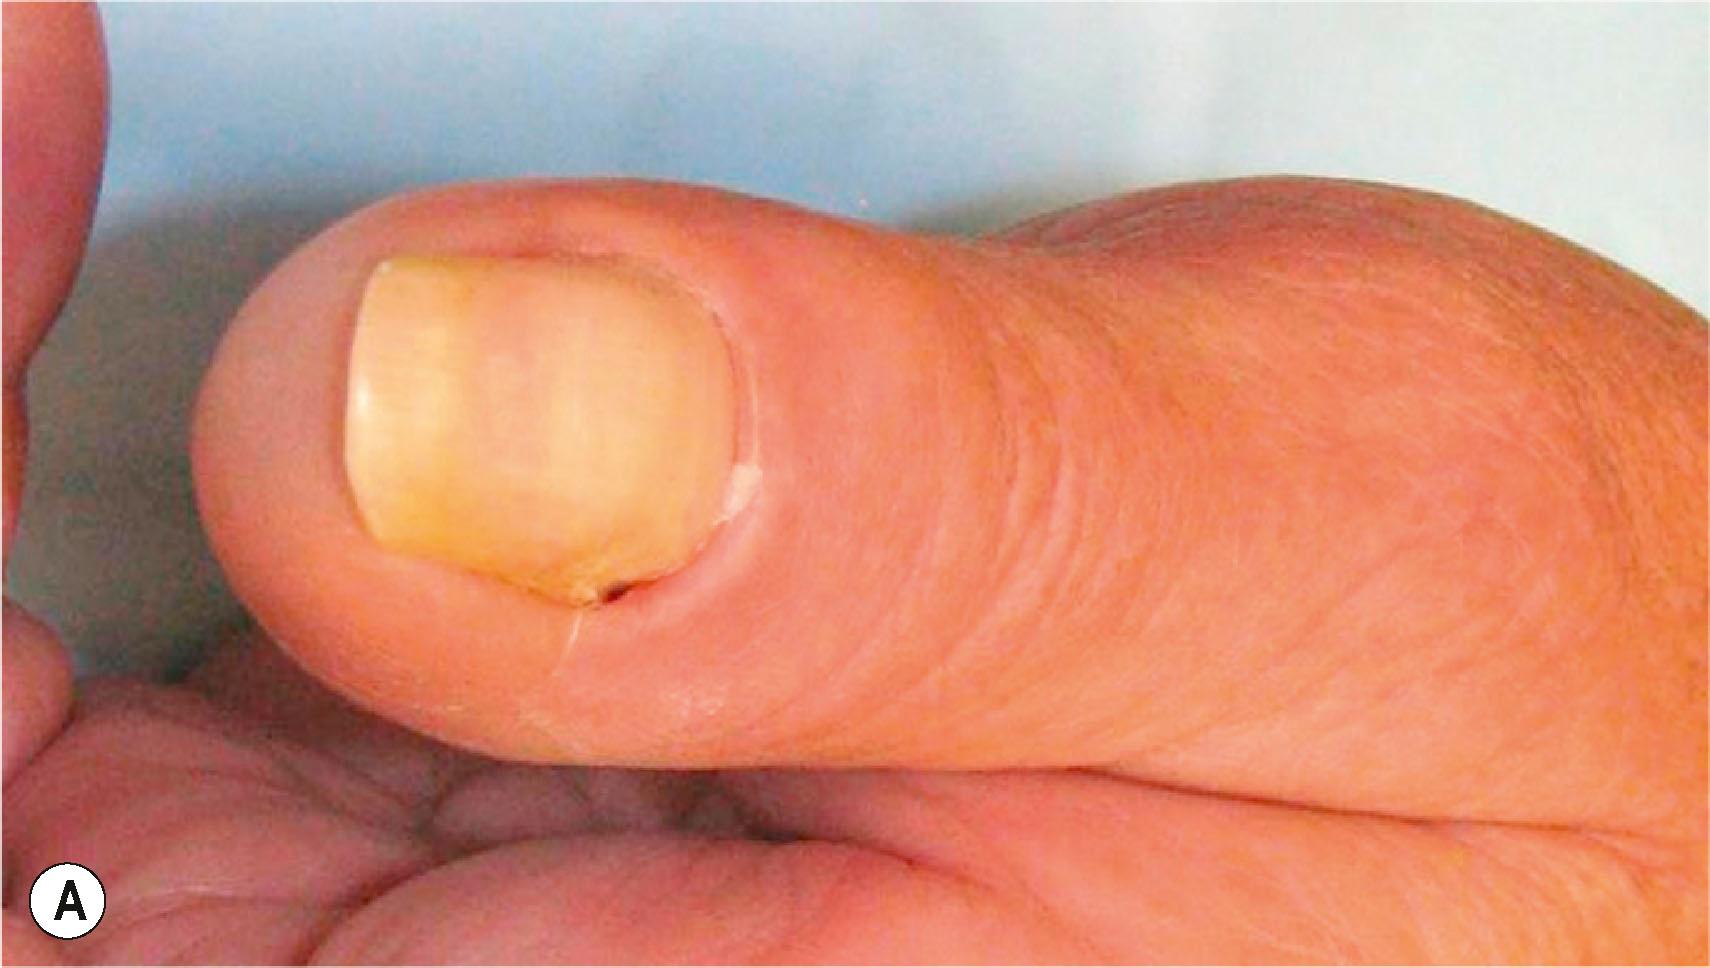 Figure 15.3, Chronic paronychia involving the thumb. (A) Dorsal view showing thickened, indurated, and erythematous tissue proximal to the nail plate. The nail plate is also thickened and discolored. (B) Lateral view demonstrates retraction of the eponychial fold.